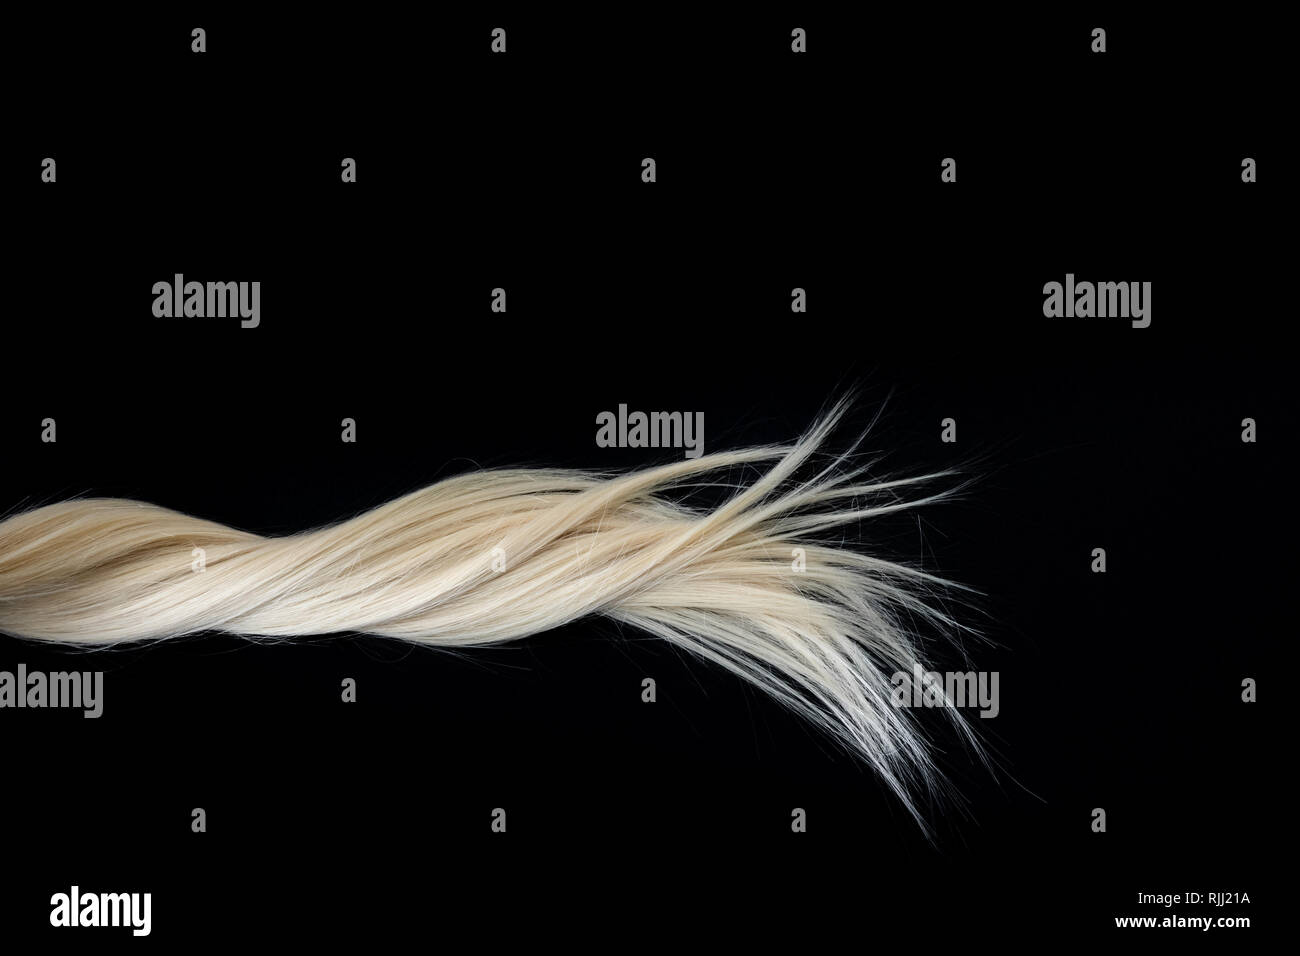 Piece of blond shiny hair texture on black. Abstract fashion style background with copy space. Stock Photo